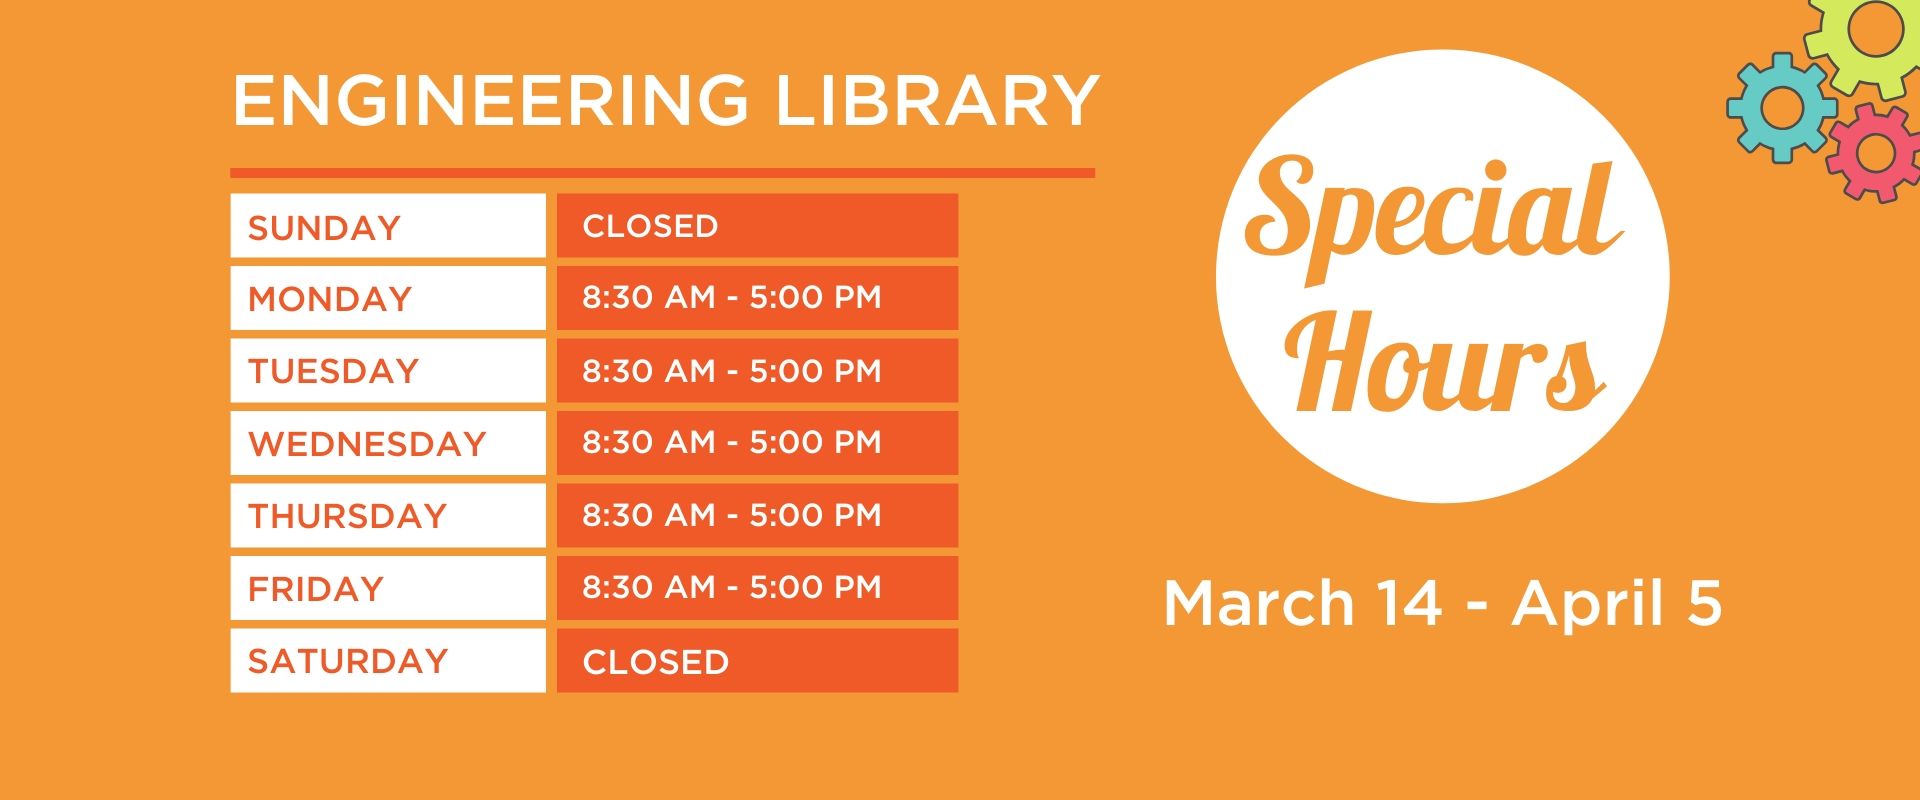 Engineering Library Special hours